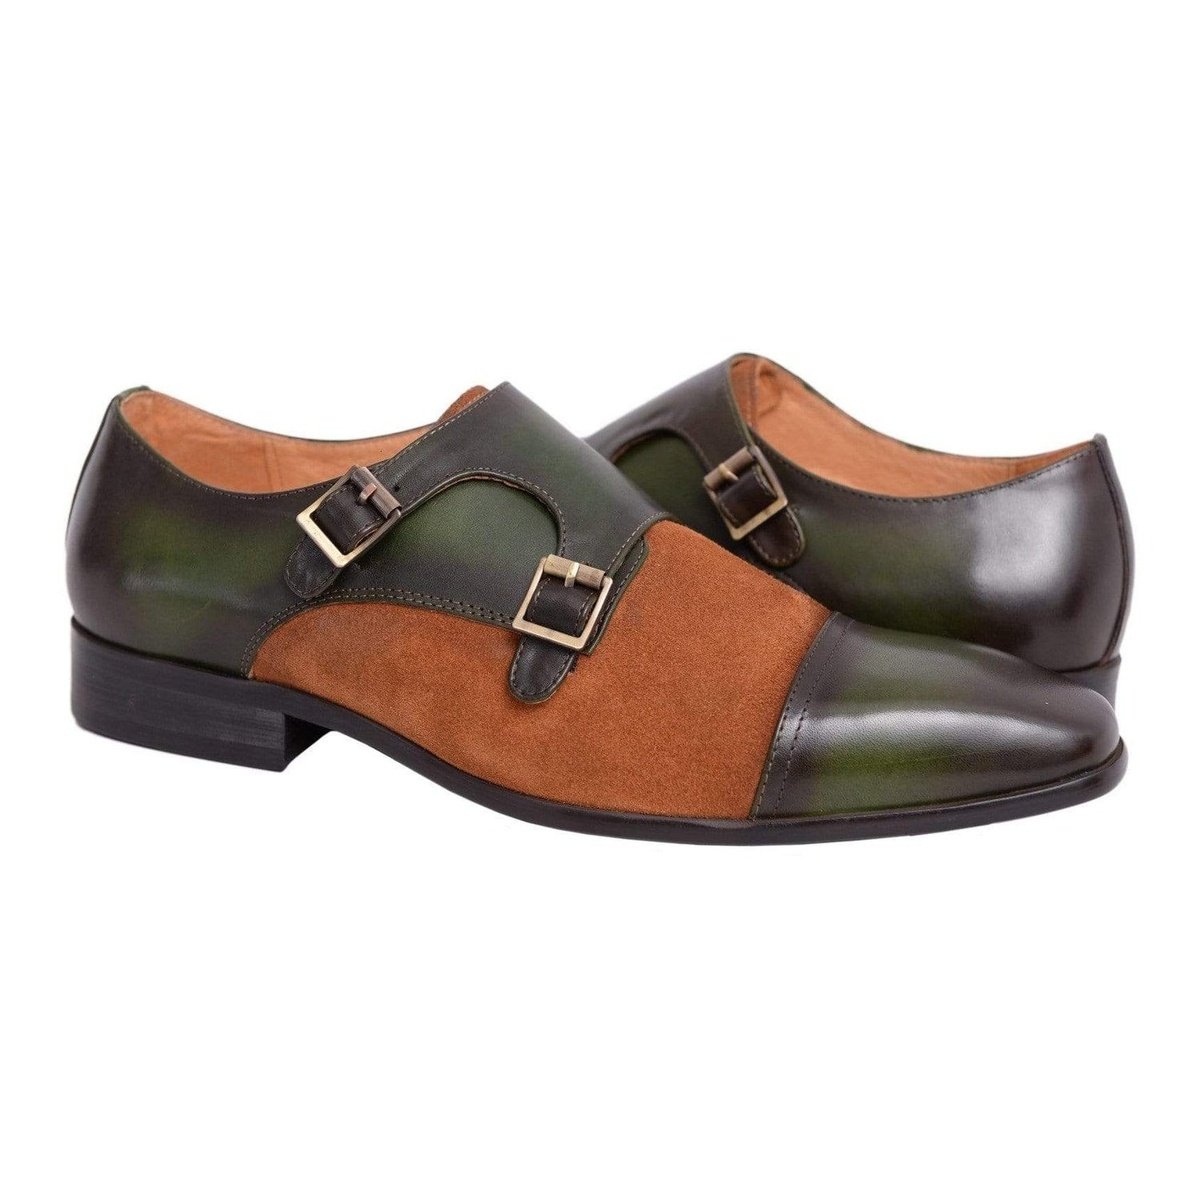 Carrucci SHOES 12 Carrucci Green With Brown Suede Cap Toe Oxford Monk Strap Leather Dress Shoes